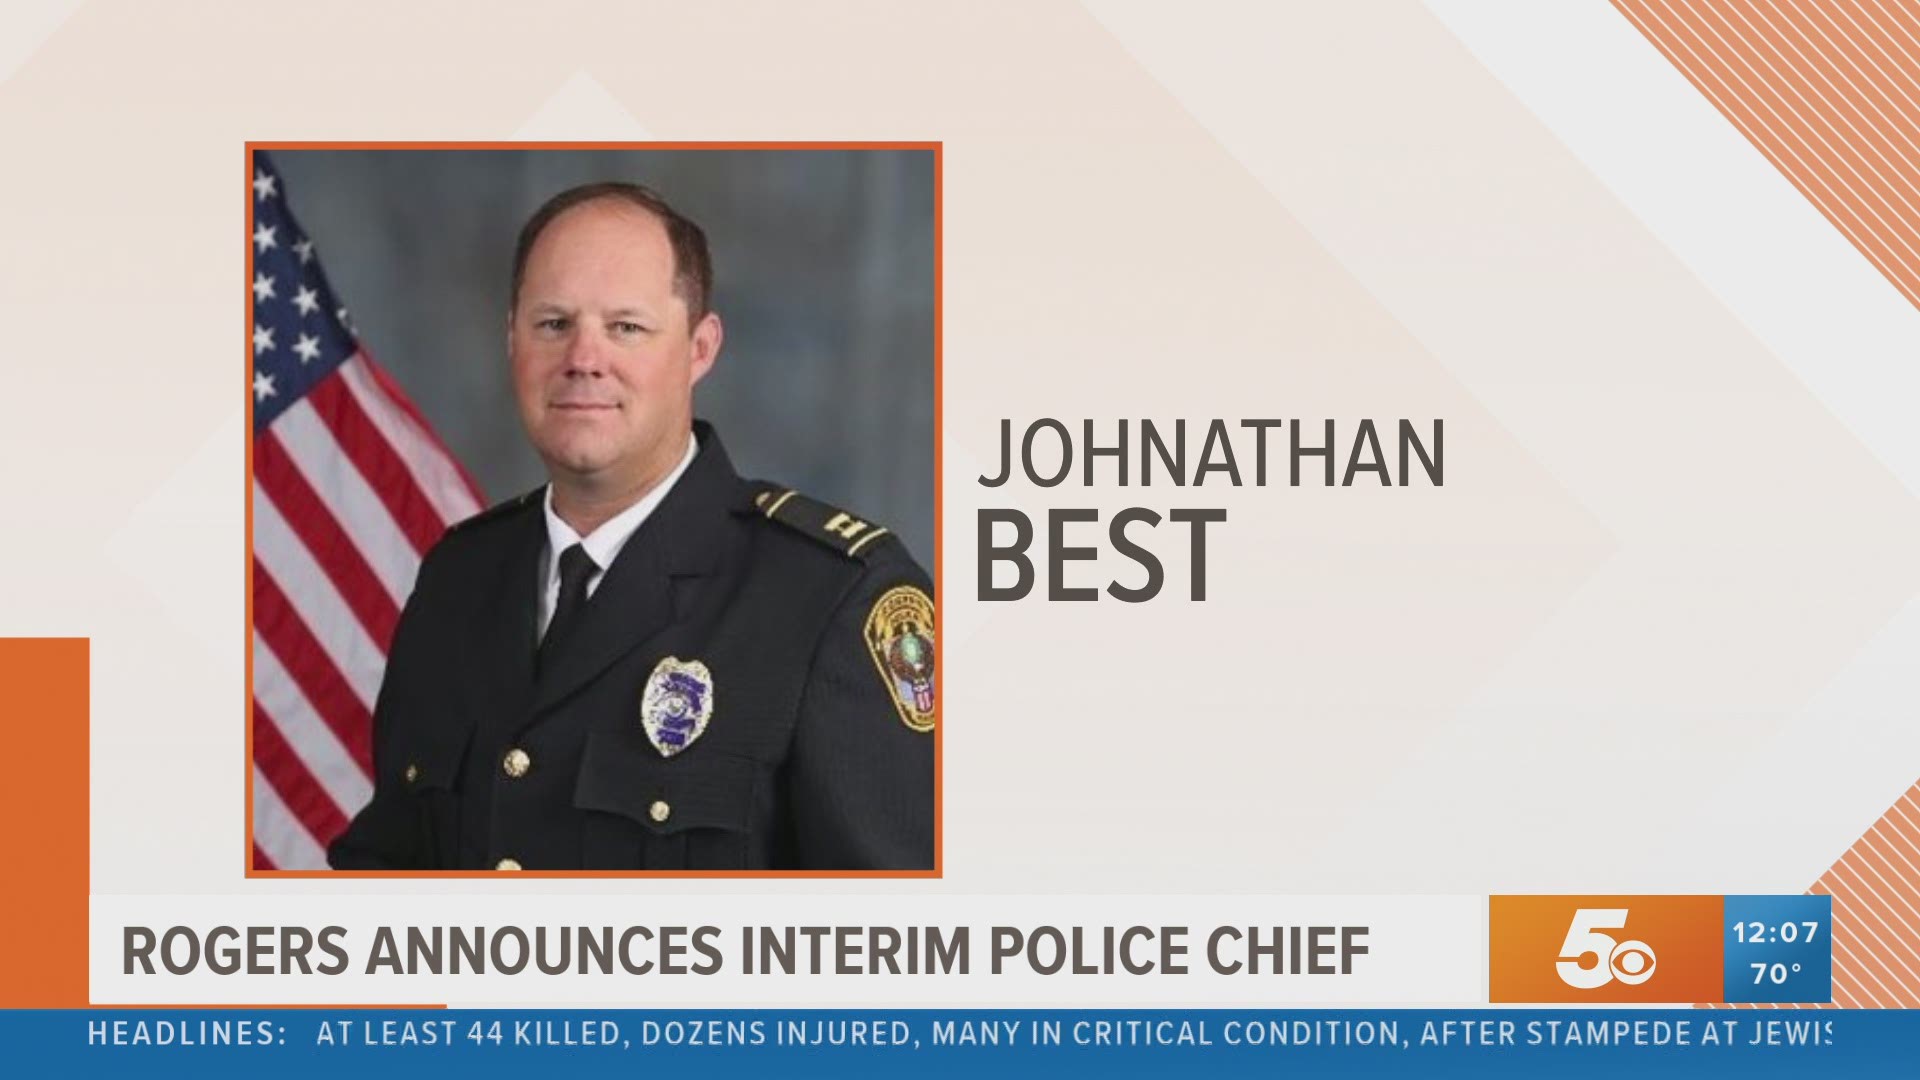 Jonathan Best has been appointed interim Chief of the Rogers Police Department, following the retirement of Chief Hayes Minor.